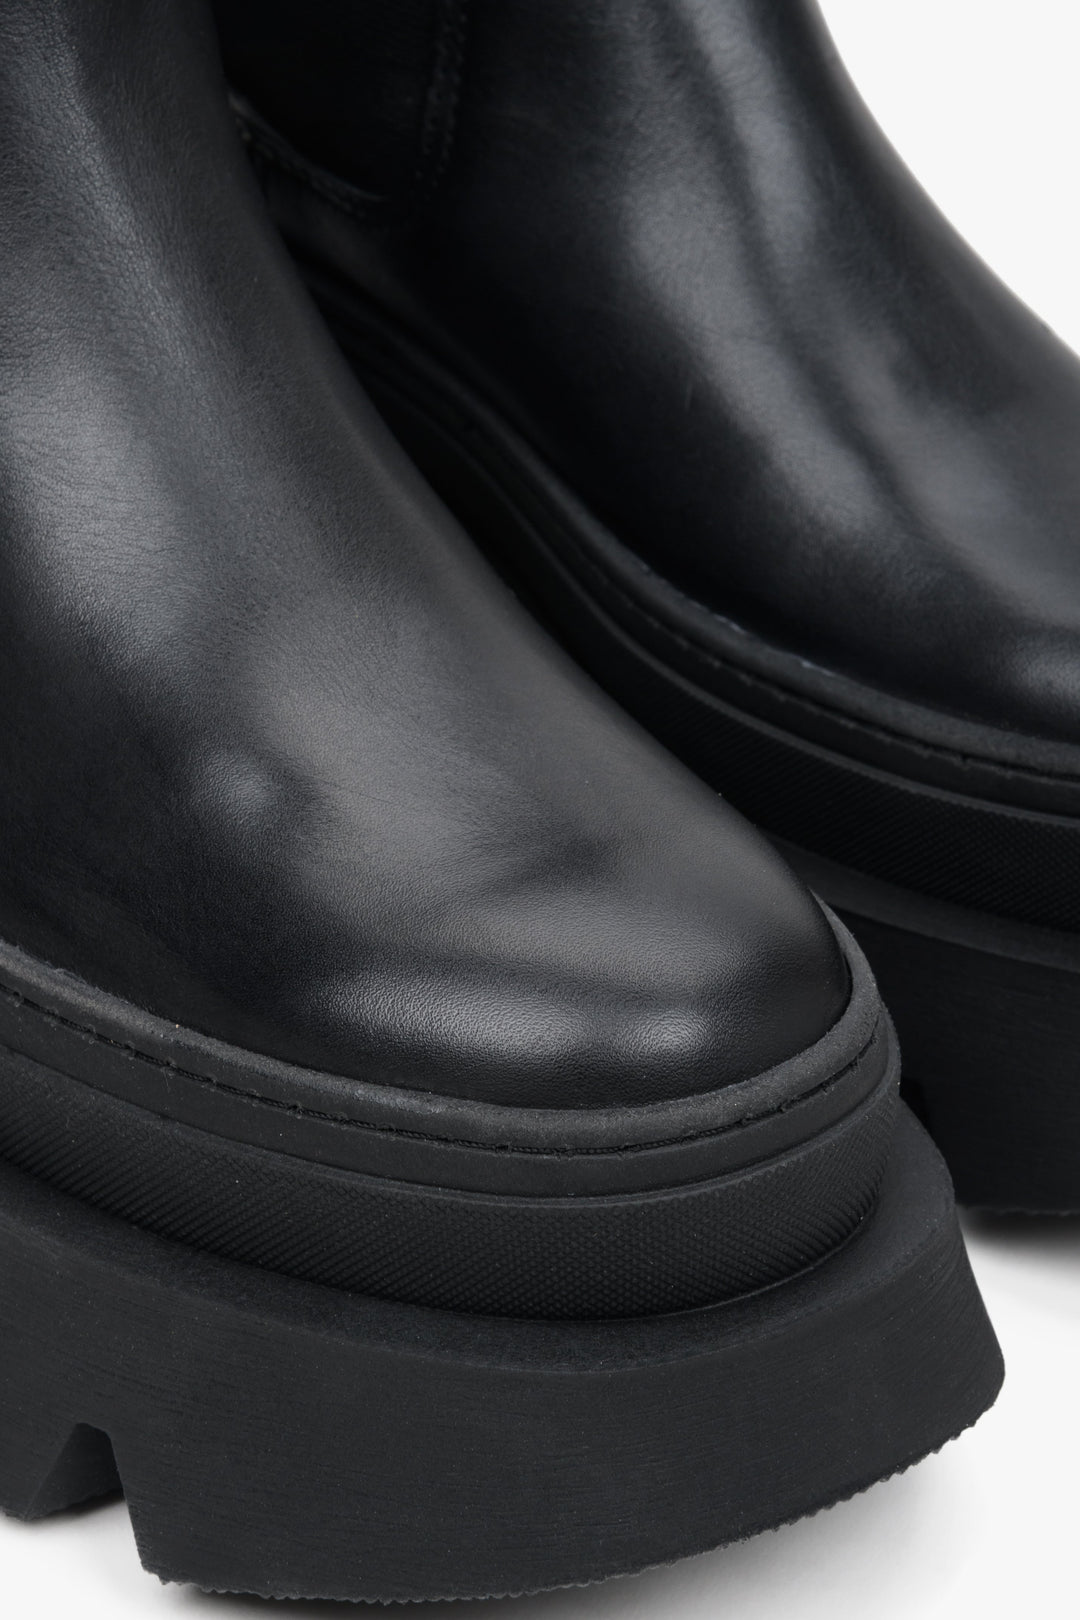 Stylish women's black ankle boots on a thick sole by Estro - close-up on the rounded toe of the model.